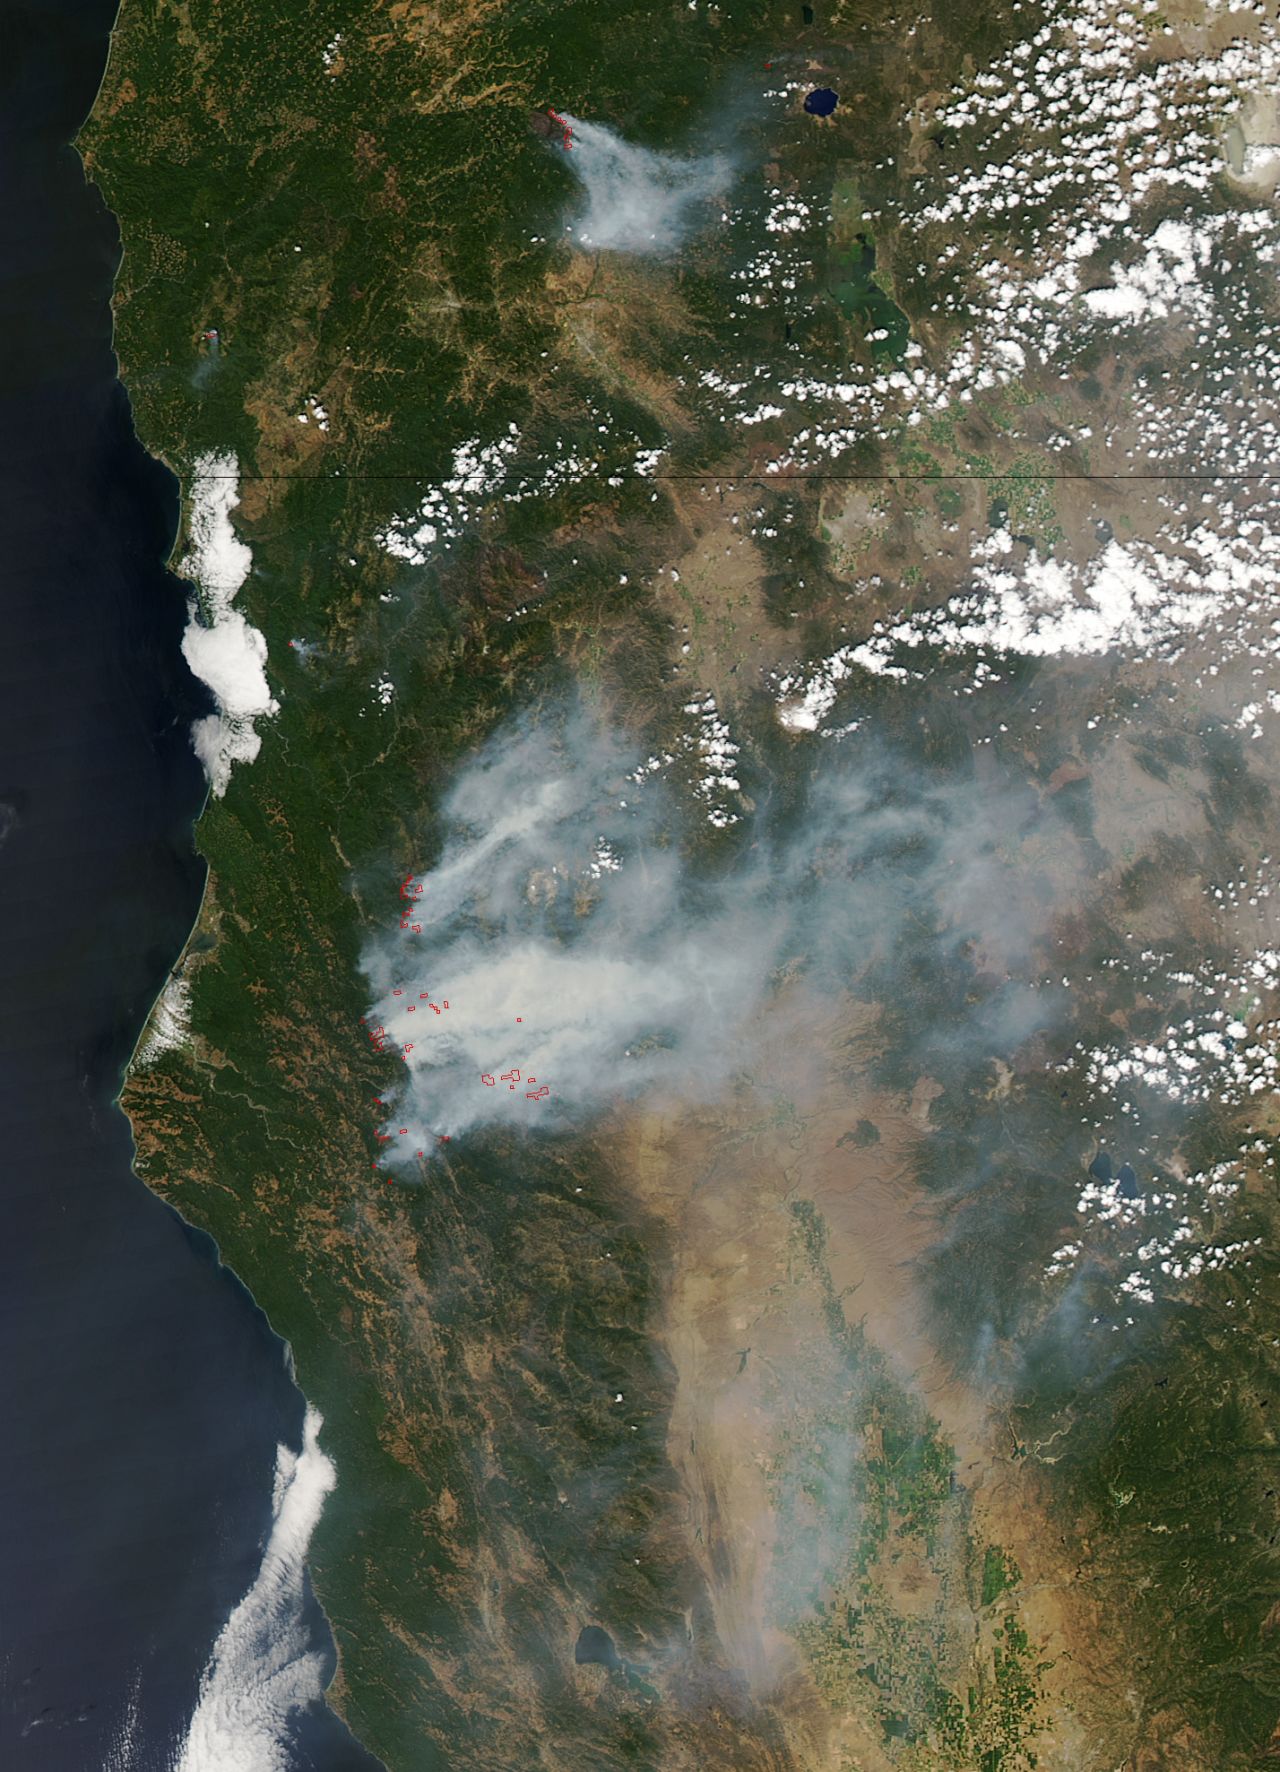 Large wildfires charred more than 6 million acres in the western U.S. in early August  That's nearly 2 million more than the 10-year average. About 80% of the burned area was in remote forests in Alaska, but large fires also scorched parts of Oregon, Washington and northern California. NASA's Aqua satellite took this image of wildfires burning in Oregon and California on August 5. Red outlines indicate the hot spots.